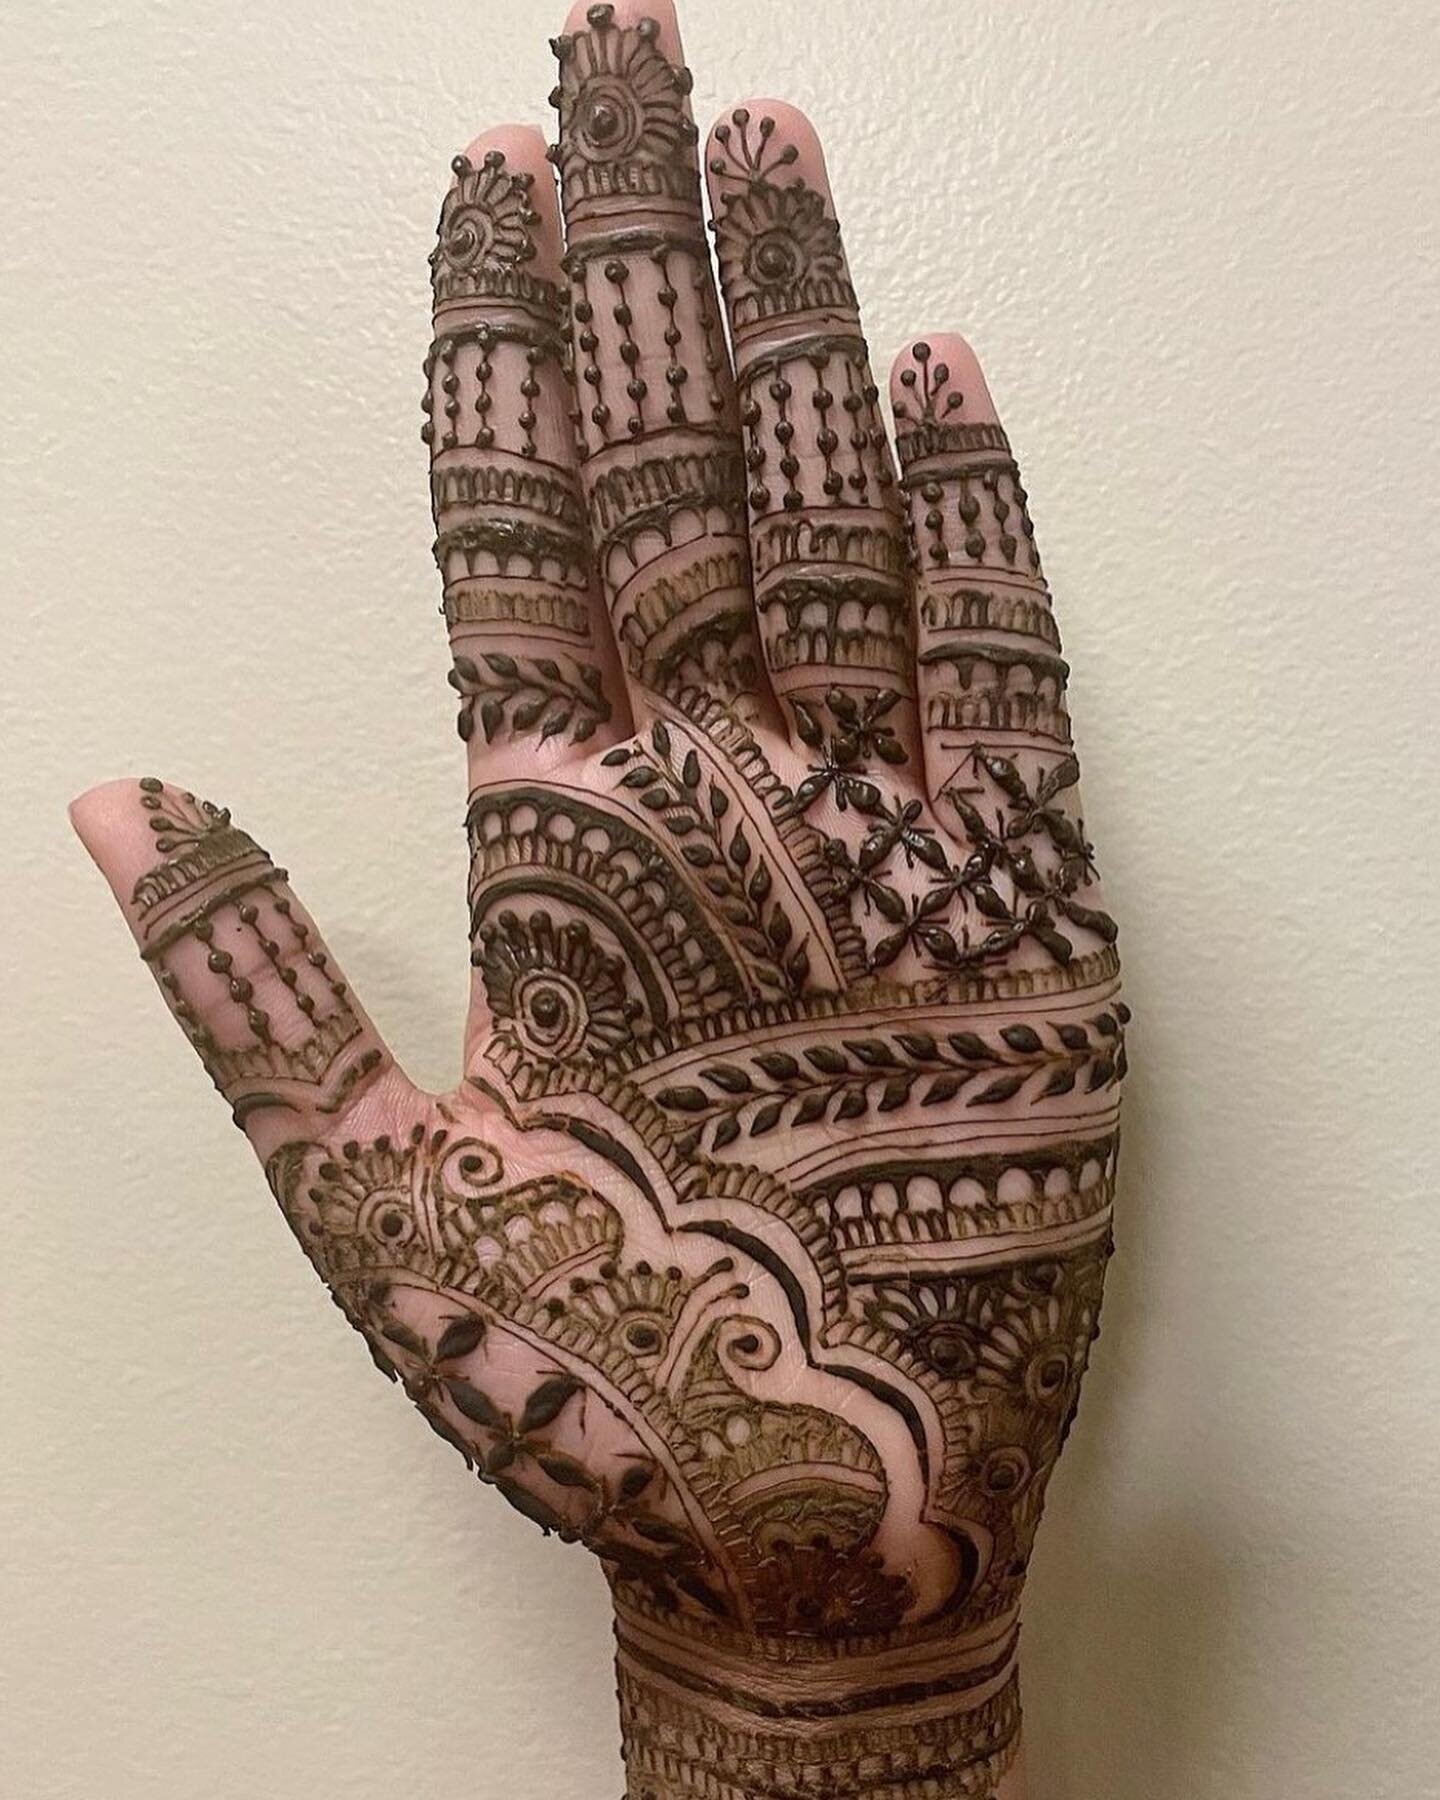 Strike beauty director by day, wonderful henna artist by night! 🦸&zwj;♀️ Send your love to @milanisdesigns 💓💓